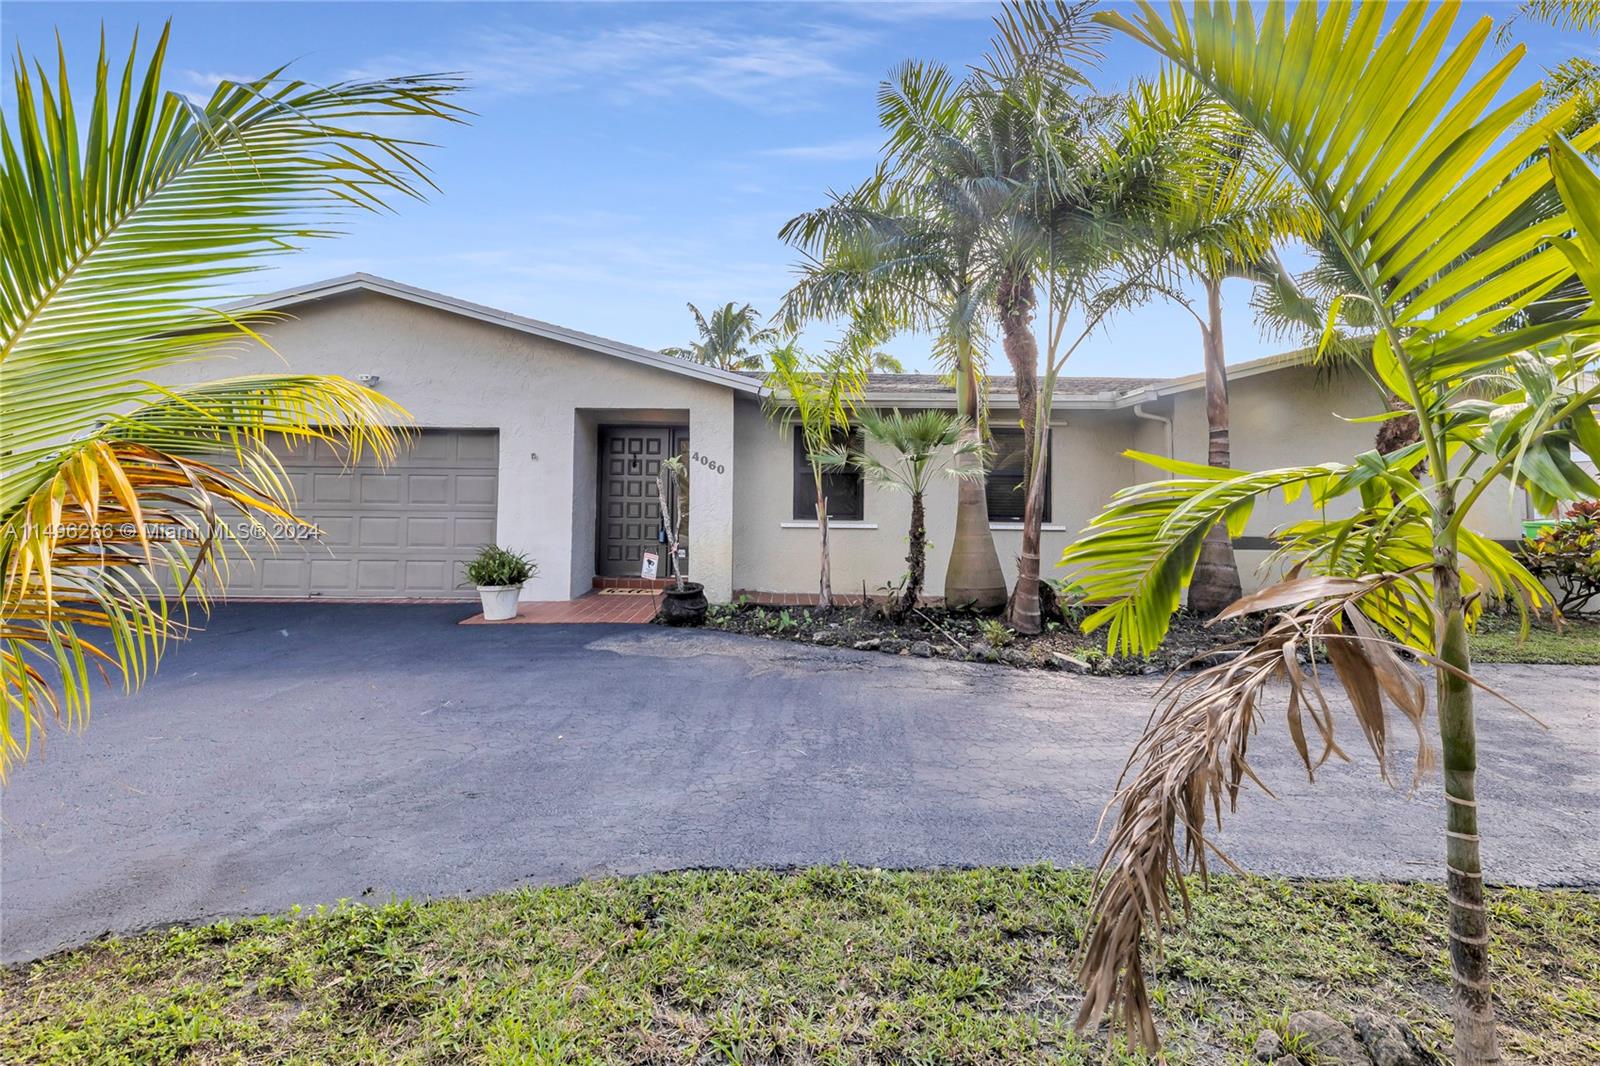 4060 120th Way, Sunrise, FL, 33323 United States, 5 Bedrooms Bedrooms, ,2 BathroomsBathrooms,Residential,For Sale,120th Way,A11496266